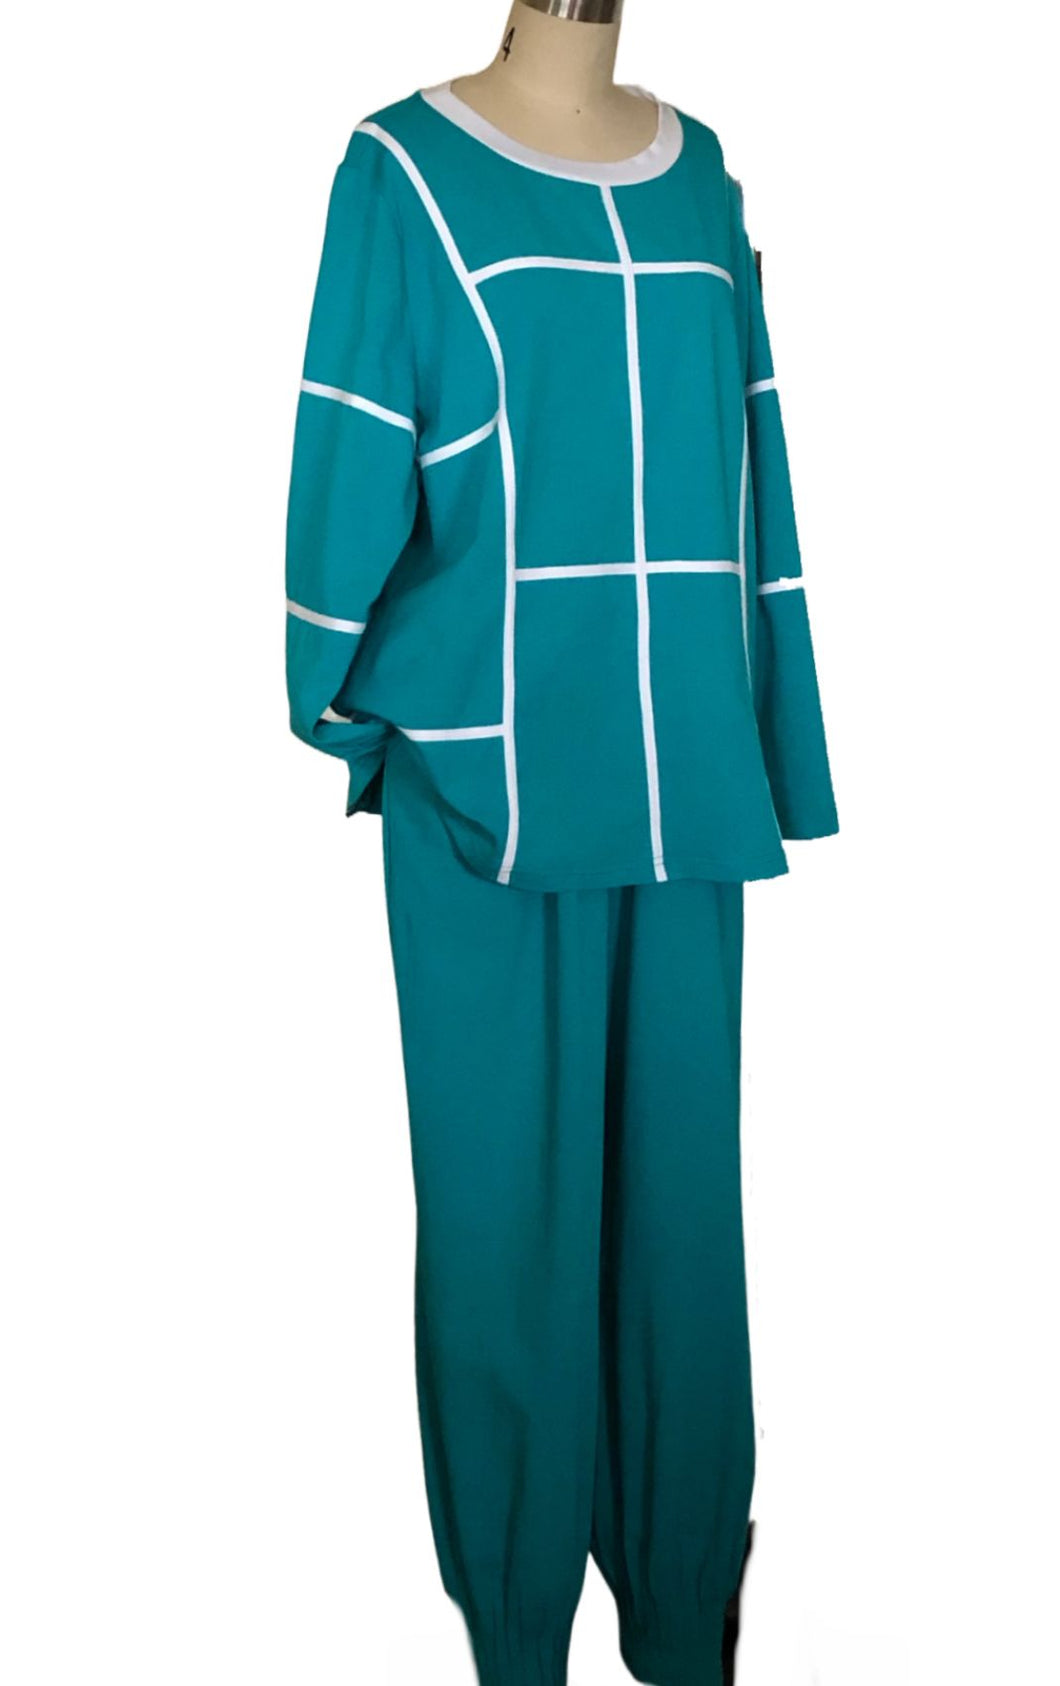 Peggy Ribbon Graphic Field Sweatsuit (Teal/White) - Style # 2304PK